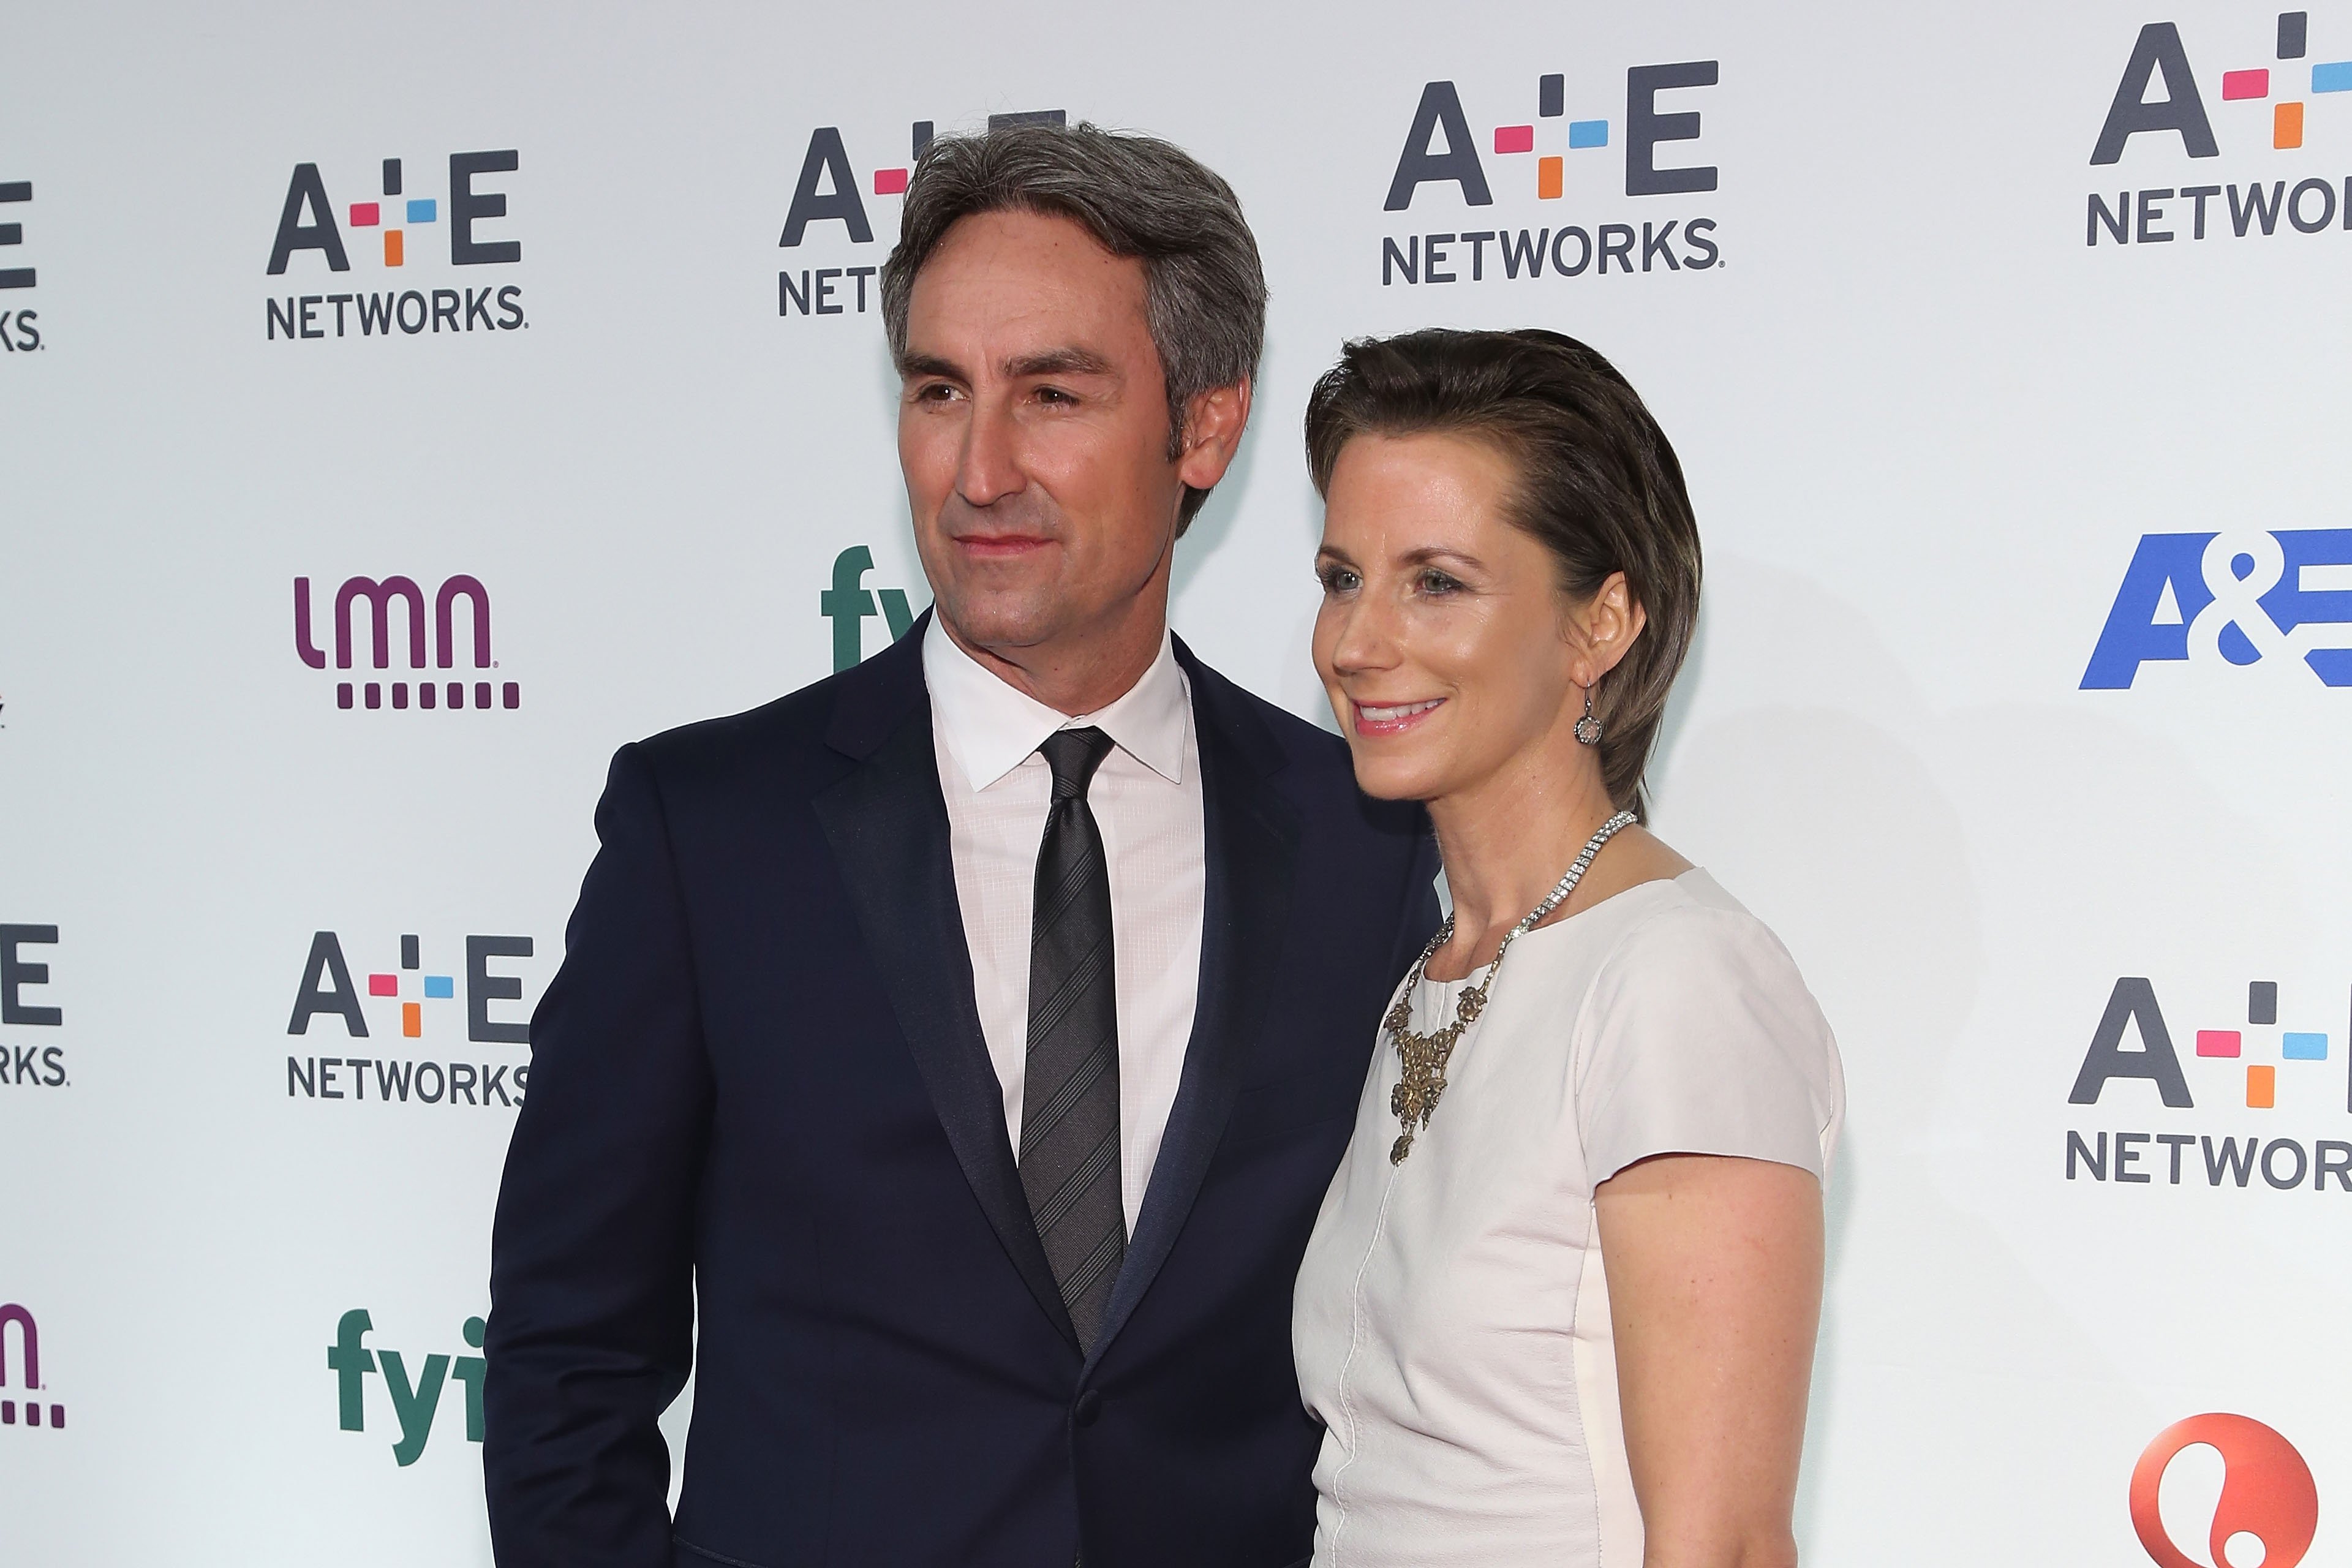 Mike Wolfe and Jodi Faeth at Park Avenue Armory on April 30, 2015, in New York City. I Source: Getty Images